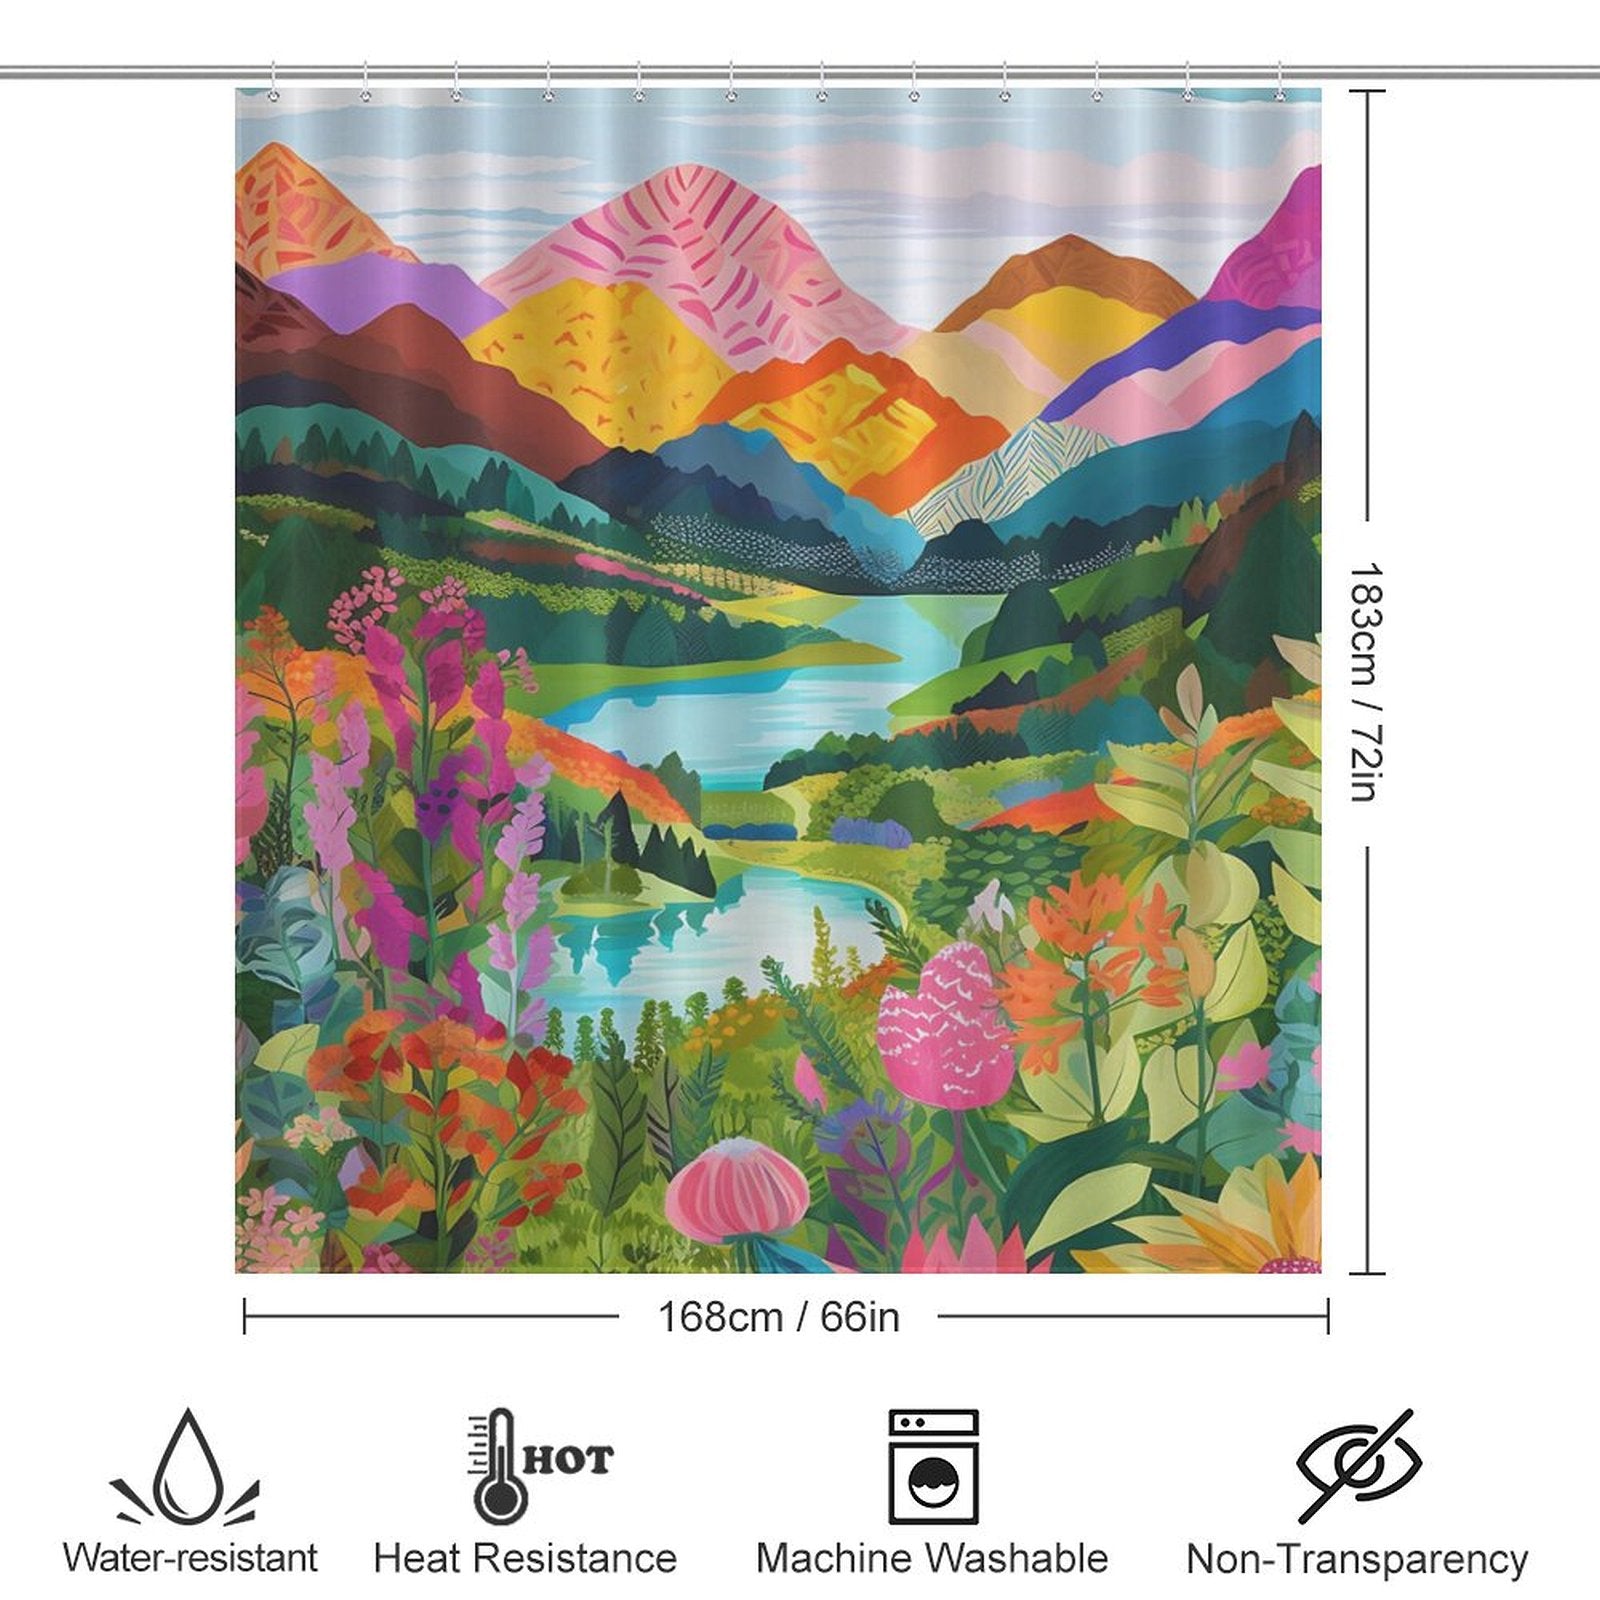 Colorful Nature Forest Lake Watercolor Art Painting Landscape Colorful Green Mountain Abstact Shower Curtain-Cottoncat featuring a vibrant watercolor art painting of a green mountain and lake scene, with various plants and flowers in the foreground. It measures 183 cm by 168 cm and is water-resistant, heat-resistant, and machine washable.
Brand Name: Cotton Cat